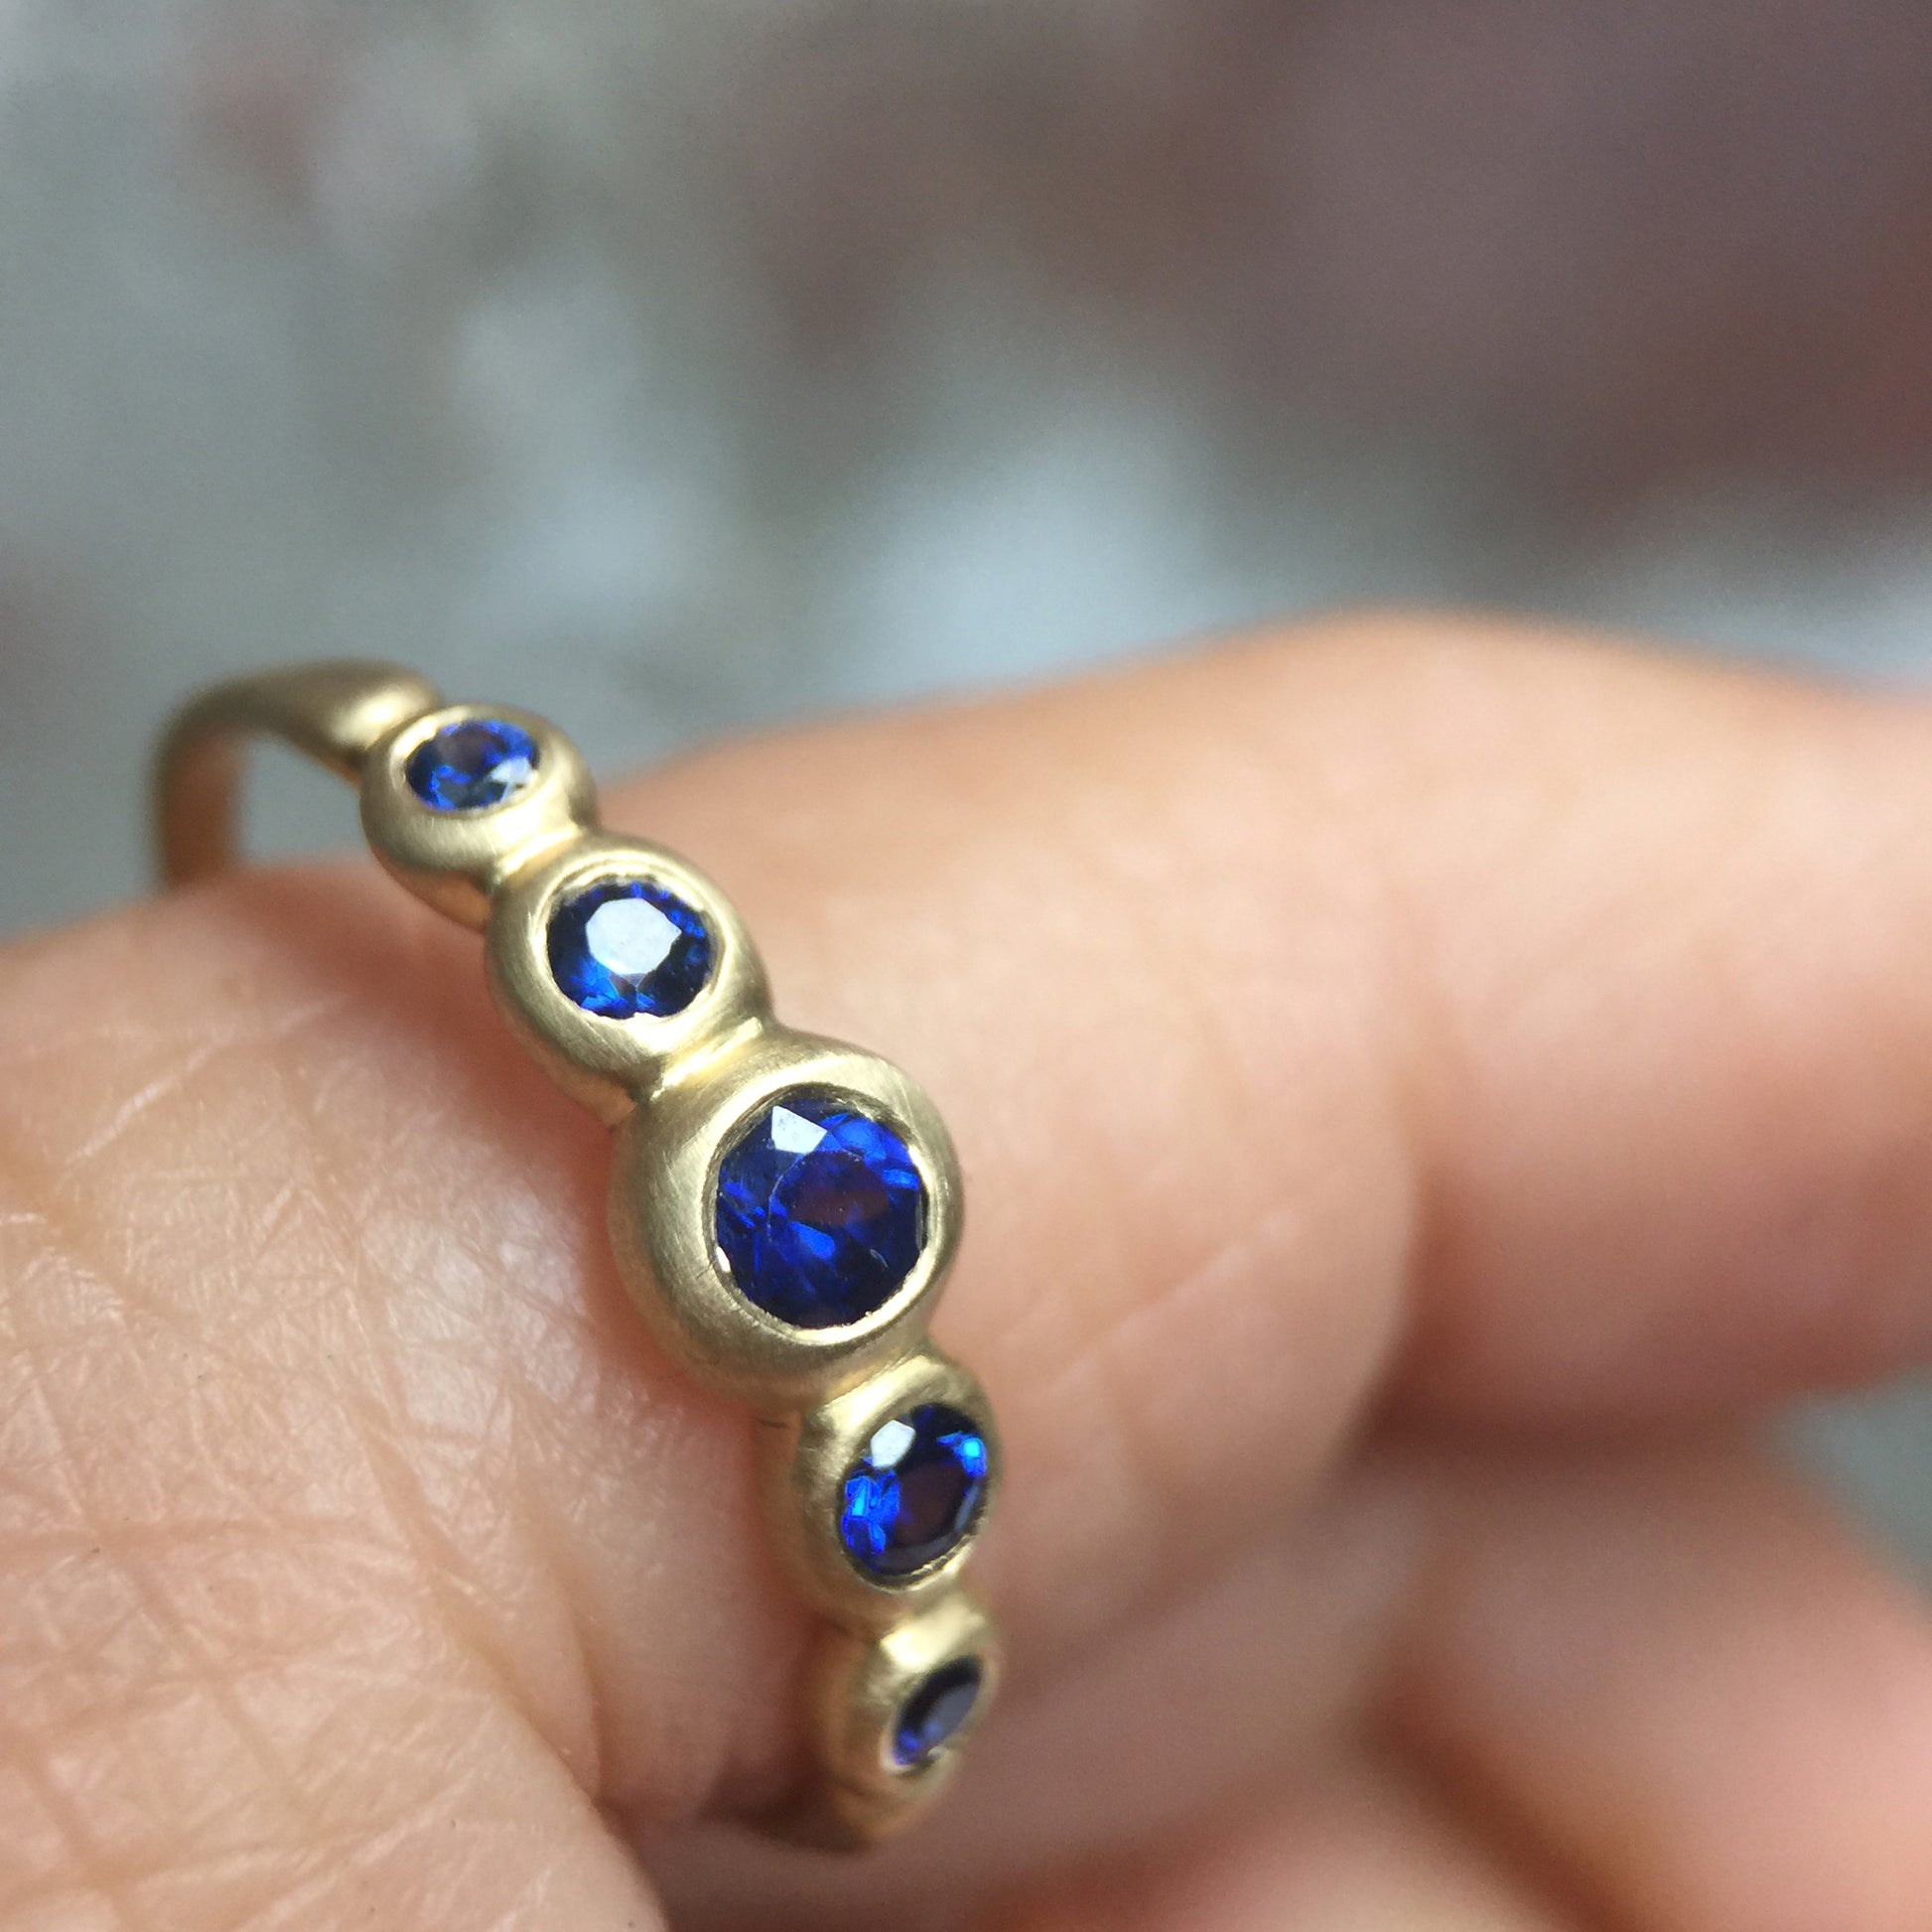 Kima Ring with blue sapphires, detail on finger